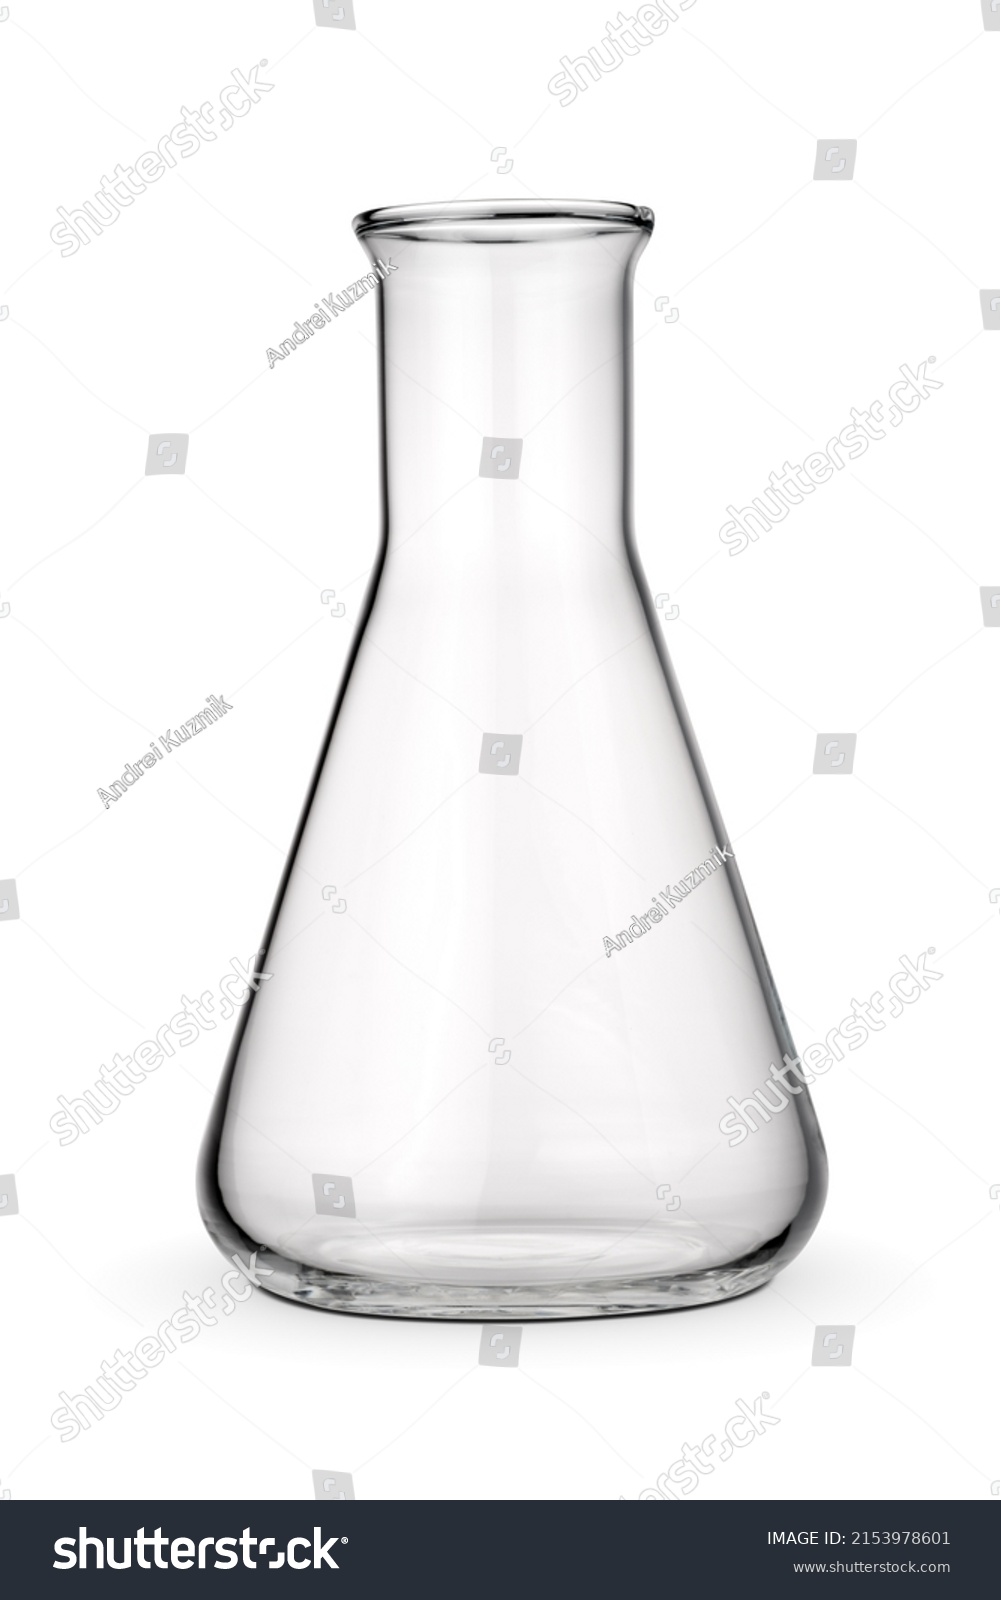 Empty 250 ml Erlenmeyer chemical flask isolated on white background. #2153978601